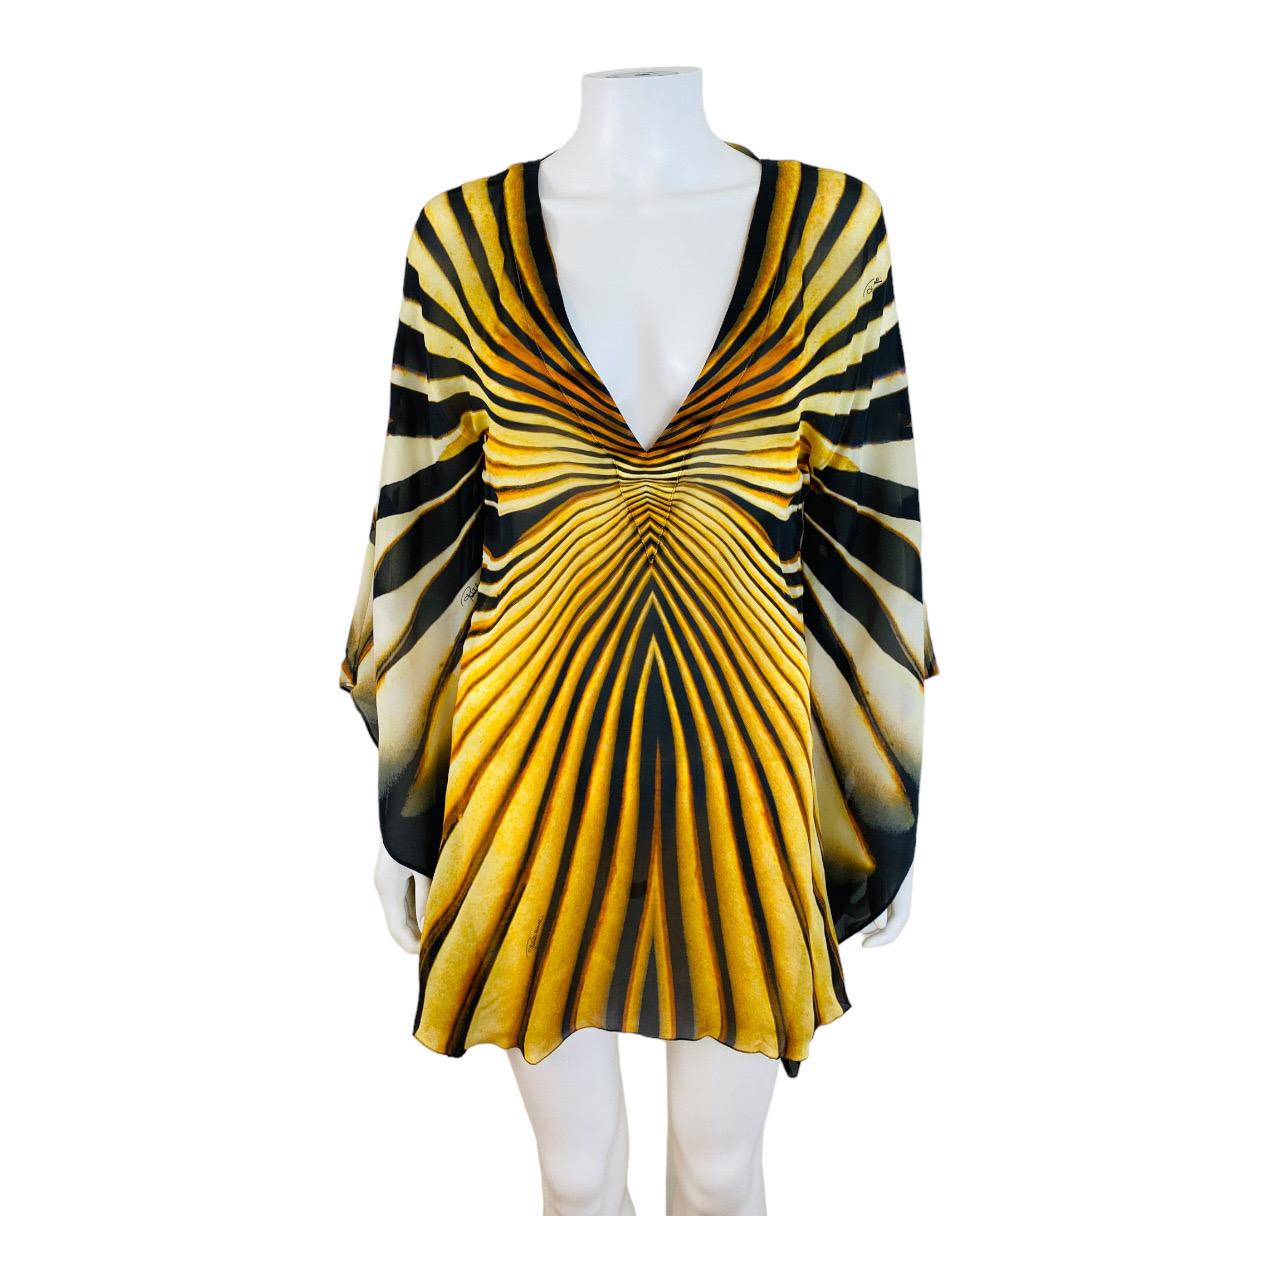 Vintage Roberto Cavalli 2007 Tiger Monarch Butterfly Mini Dress Angel Sleeves In Excellent Condition For Sale In Denver, CO